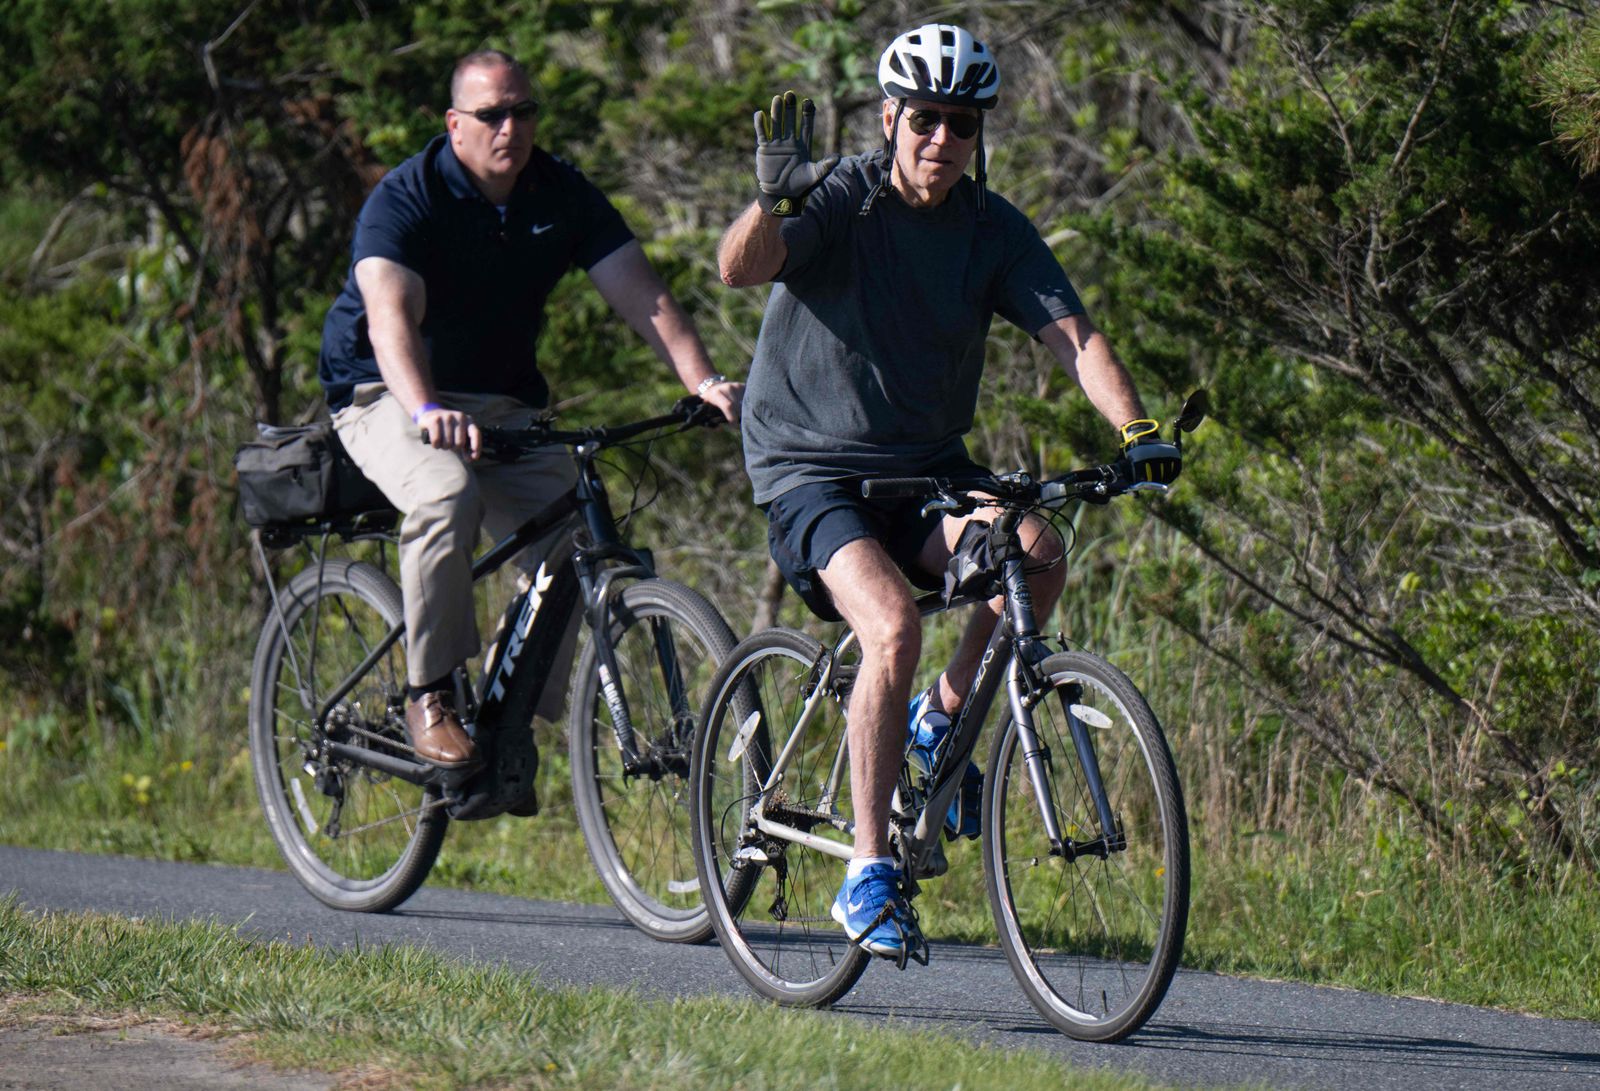 US President Joe Biden rides his bicycle at Gordon's Pond State Park in Rehoboth Beach, Delaware, on June 18, 2022. (Photo by SAUL LOEB / AFP) - AFP